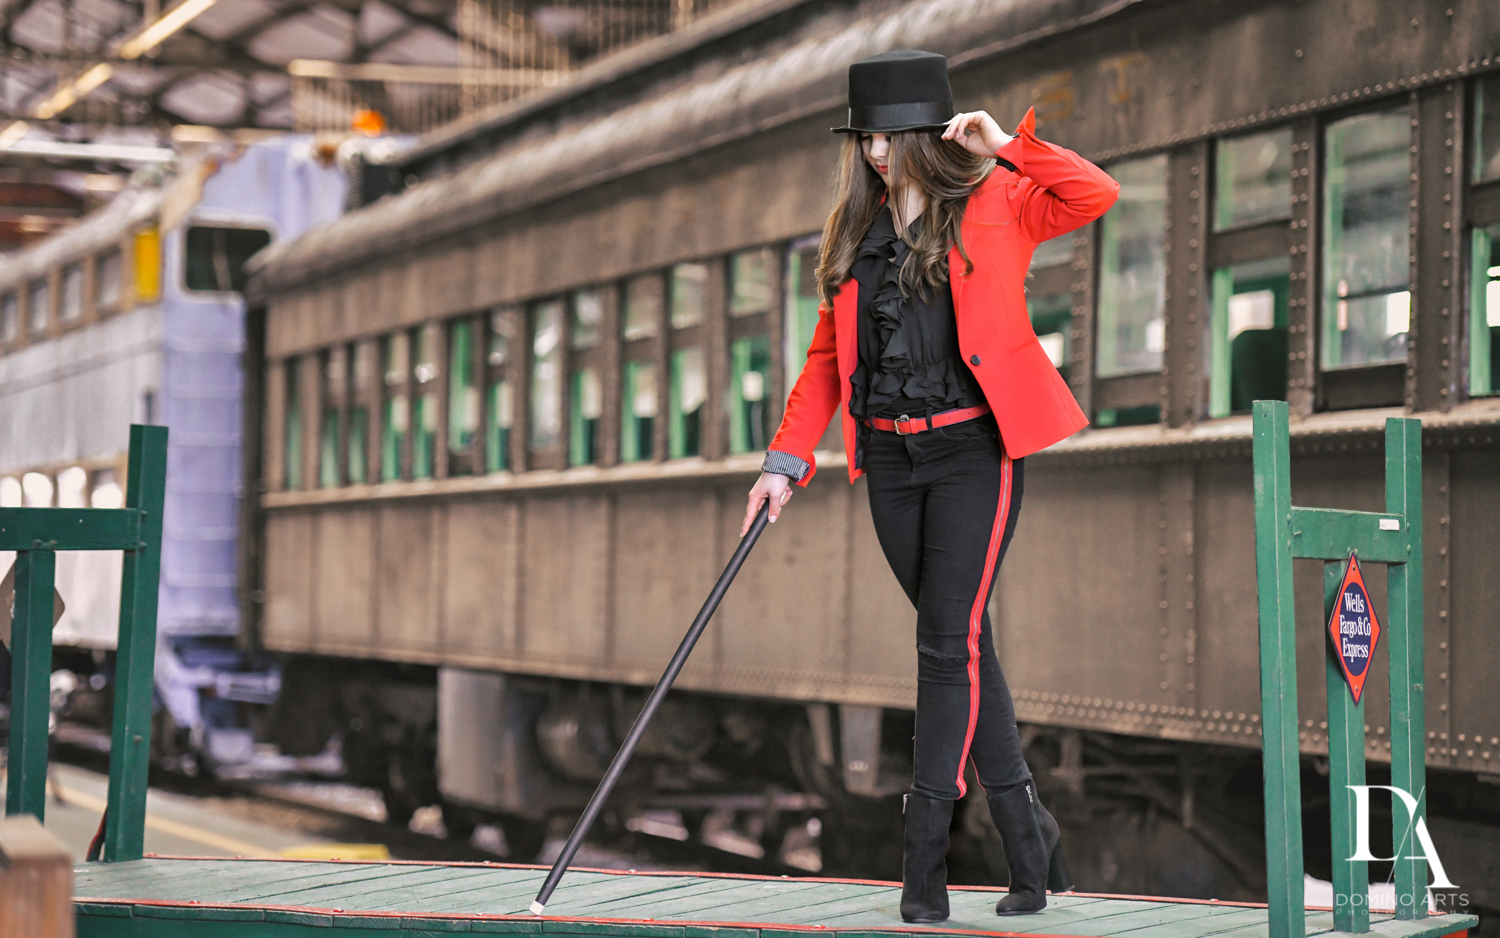 Greatest Showman themed Bat Mitzvah Pre Session at Goldcoast Railroad Museum by Domino Arts Photography